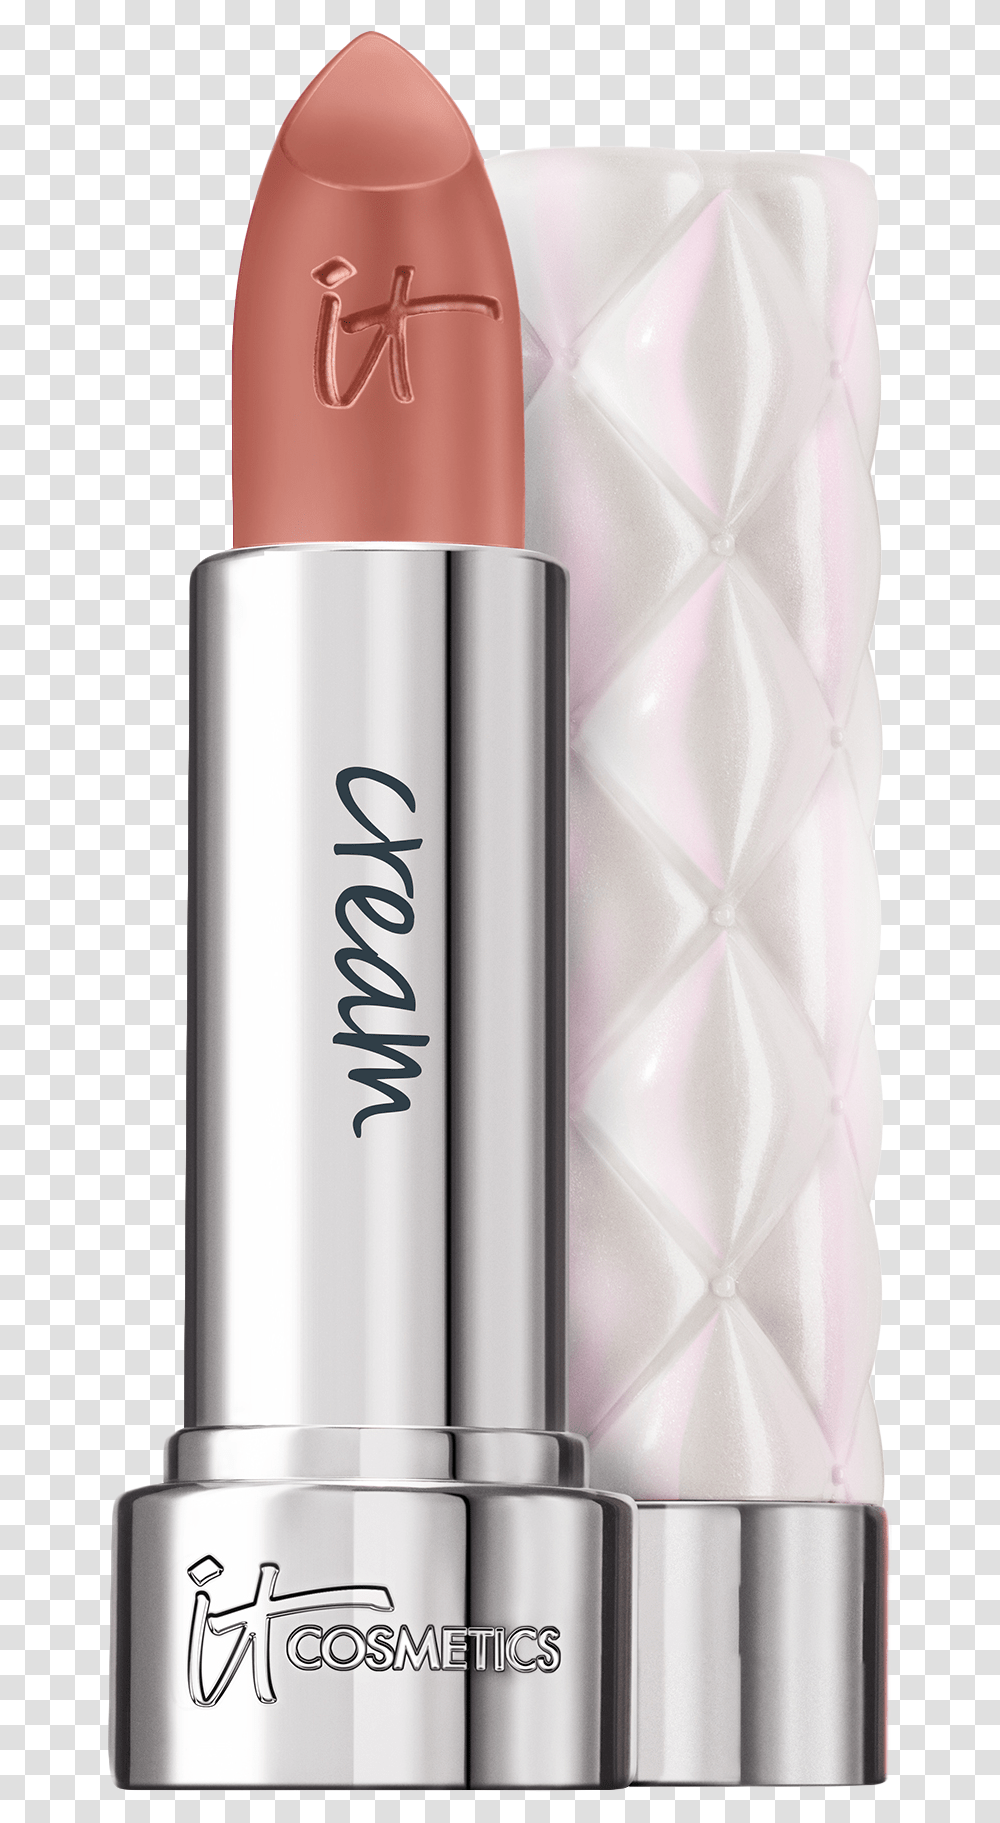 Try These Makeup Products For A Pop Of Love Giggle Magazine Cosmetics Pillow Lips Cream Lipstick Vision Cream Transparent Png